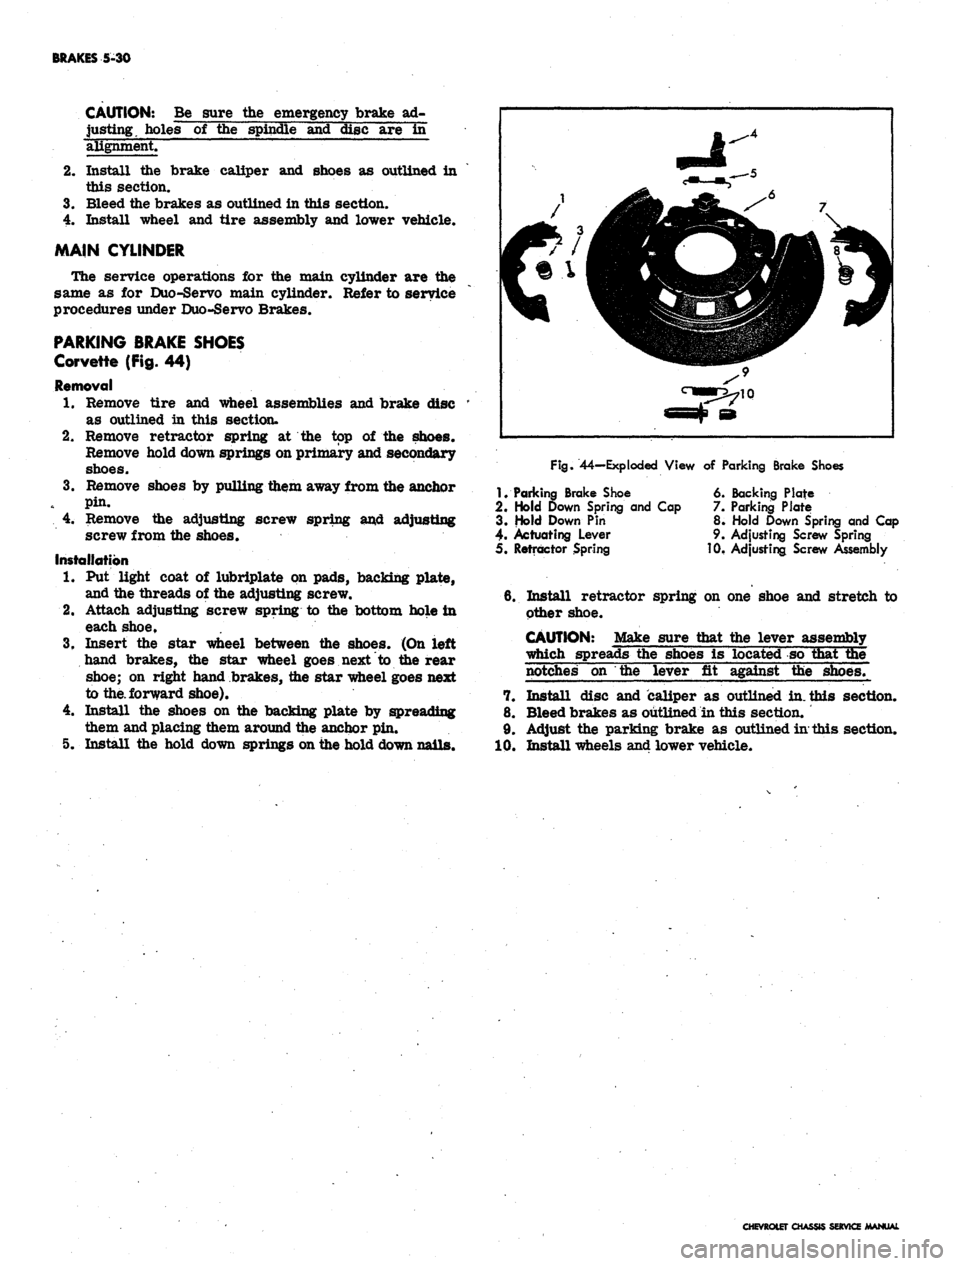 CHEVROLET CAMARO 1967 1.G Chassis Workshop Manual 
BRAKES 5-30

CAUTION: Be sure the emergency brake ad-

justing, holes of the spindle and disc are in

alignment.

2.
 Install the brake caliper and shoes as outlined in

this section.

3.
 Bleed the 